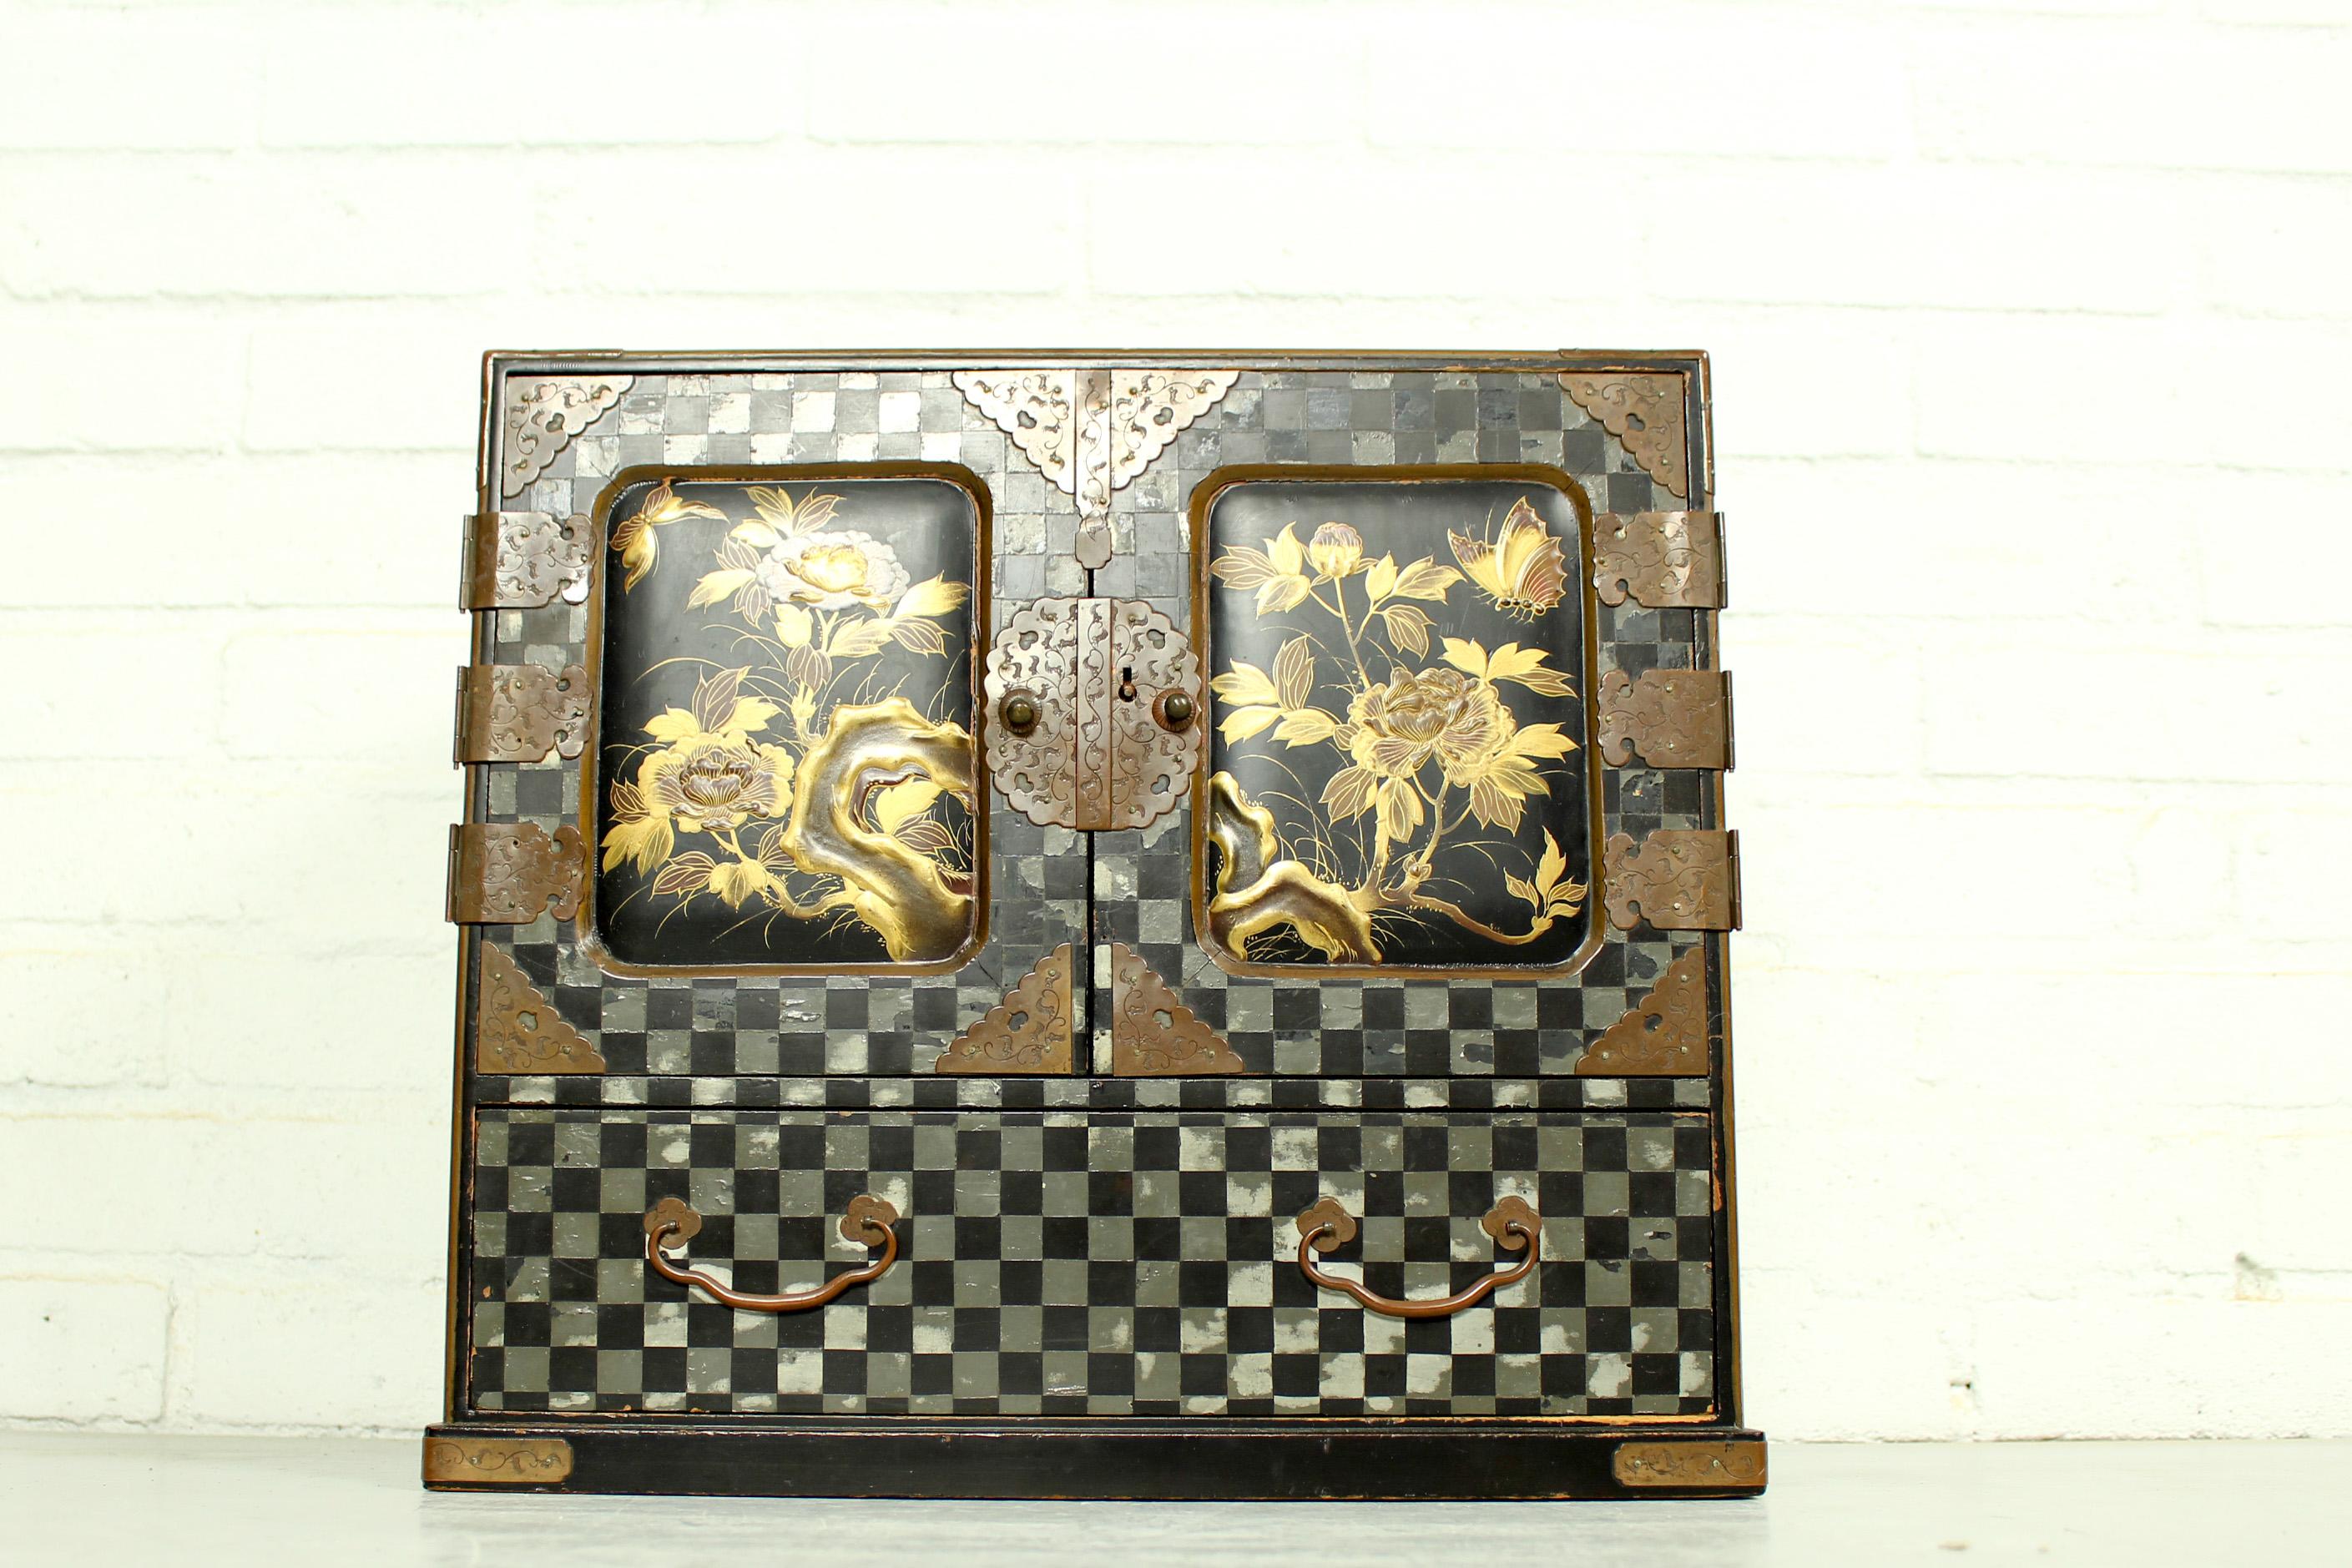 This very beautiful antique early 20th century Japanese jewelry box is made of black lacquer and has beautiful floral gilded detailing. This piece shows wear consistent with its age, and some original hardware is missing (see photograph).